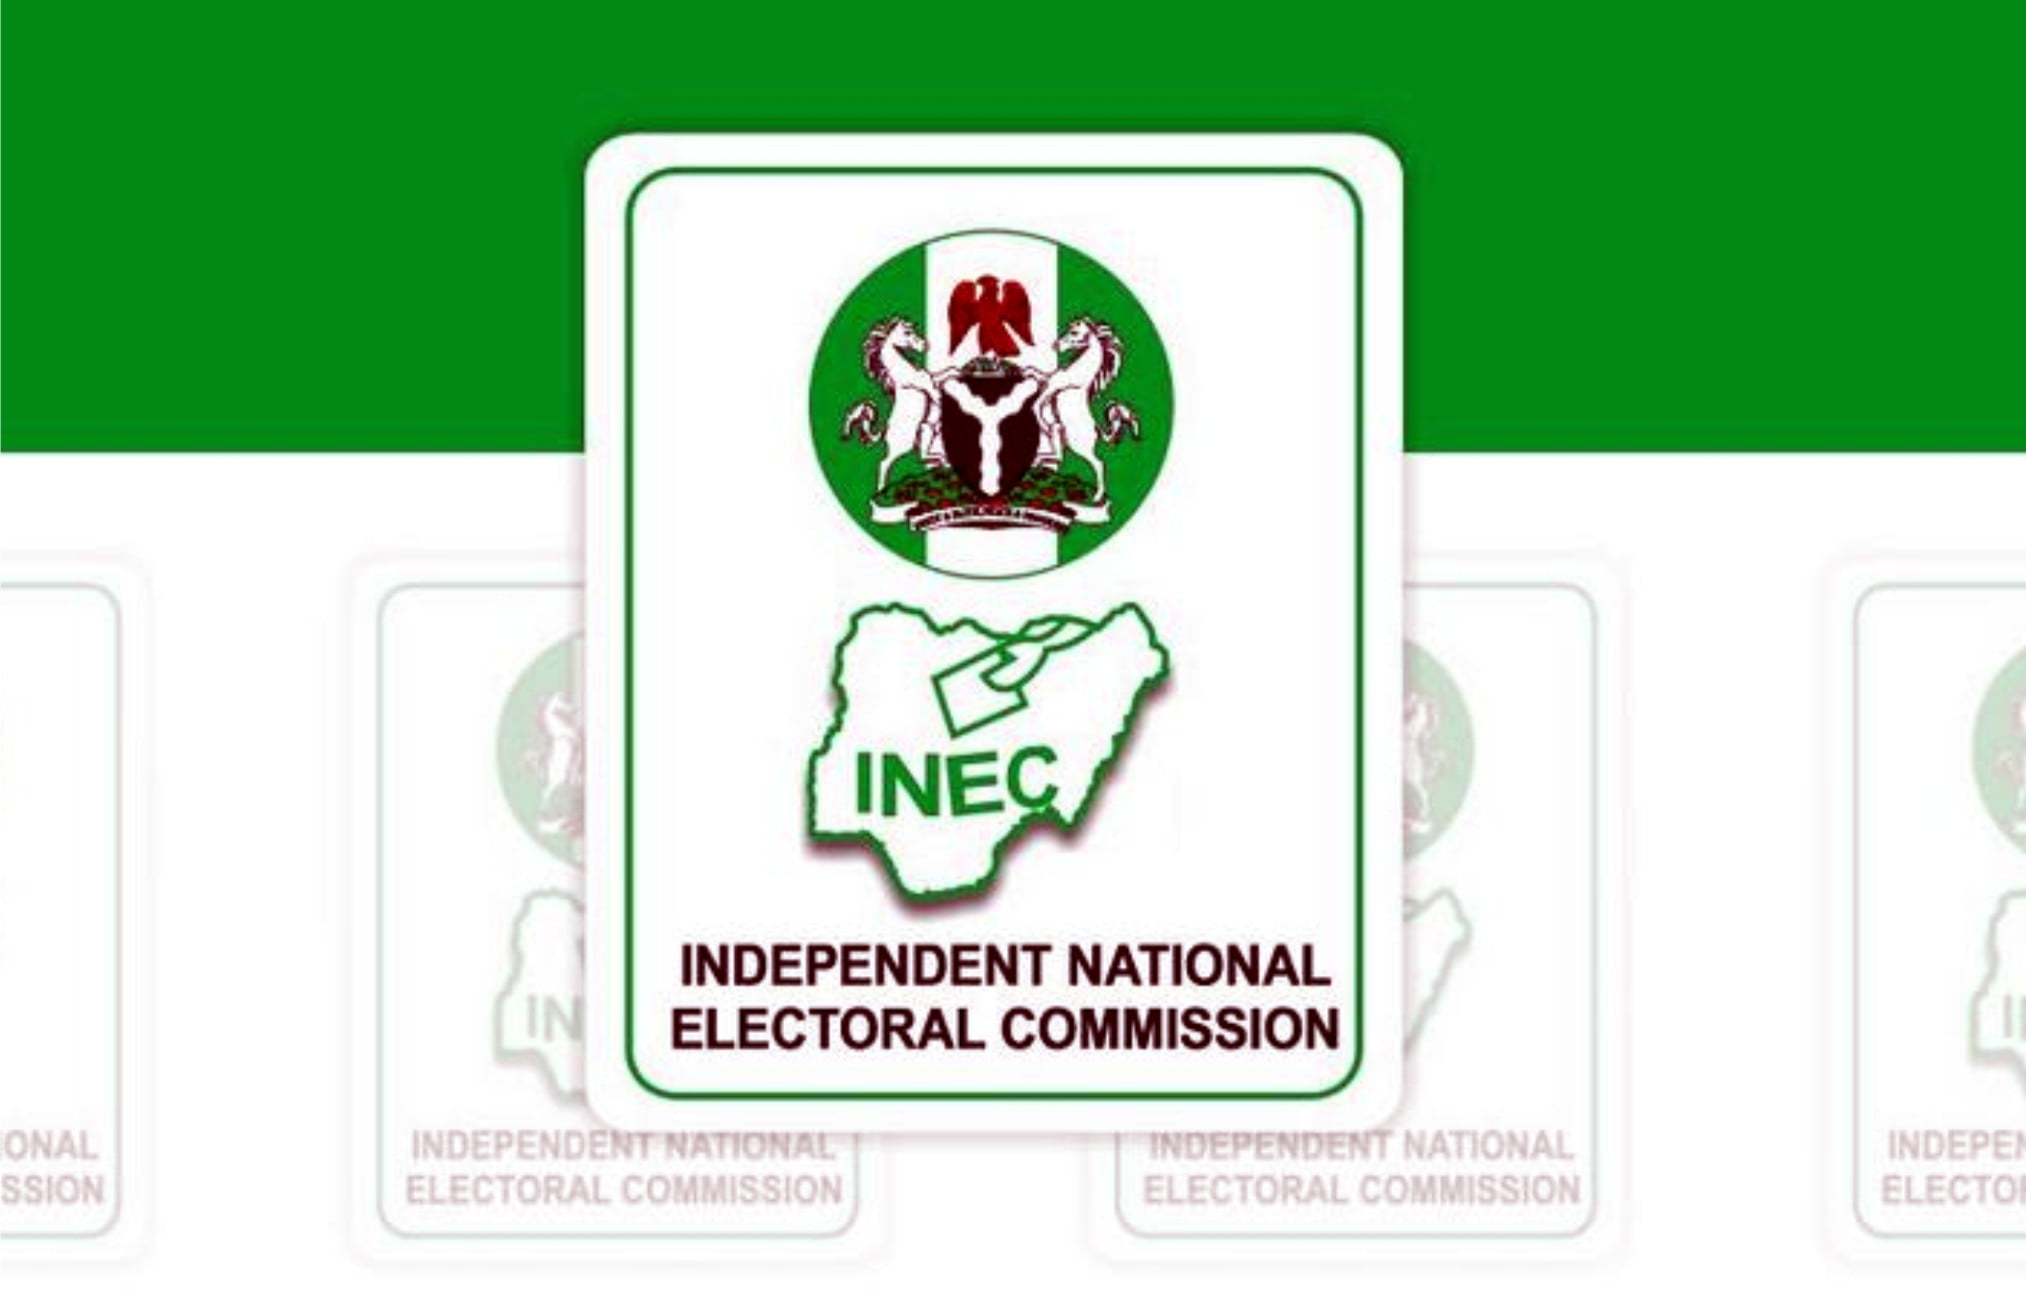 INEC seeks voter registration centres in IDP camps